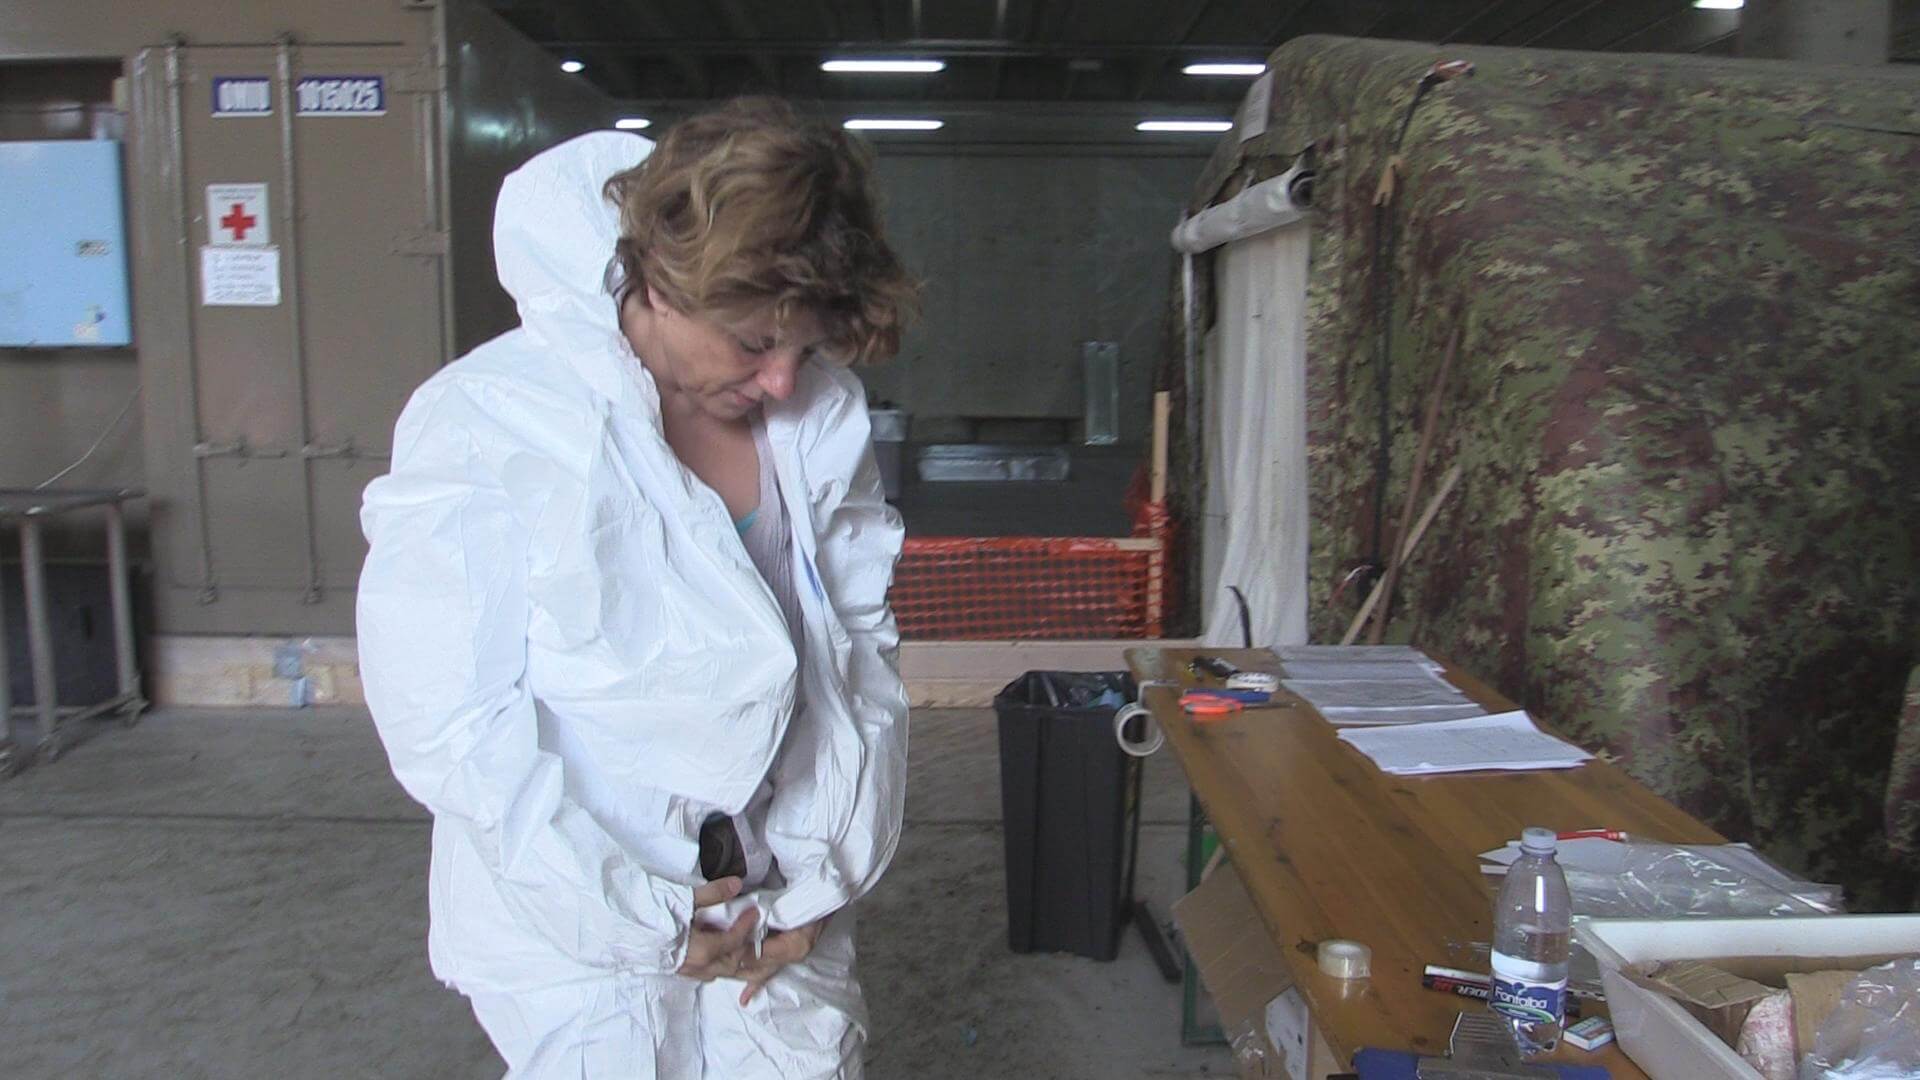 Still from Number 387. A woman zips up her medical hazard suit. She is standing in front of a table and military tent structure.